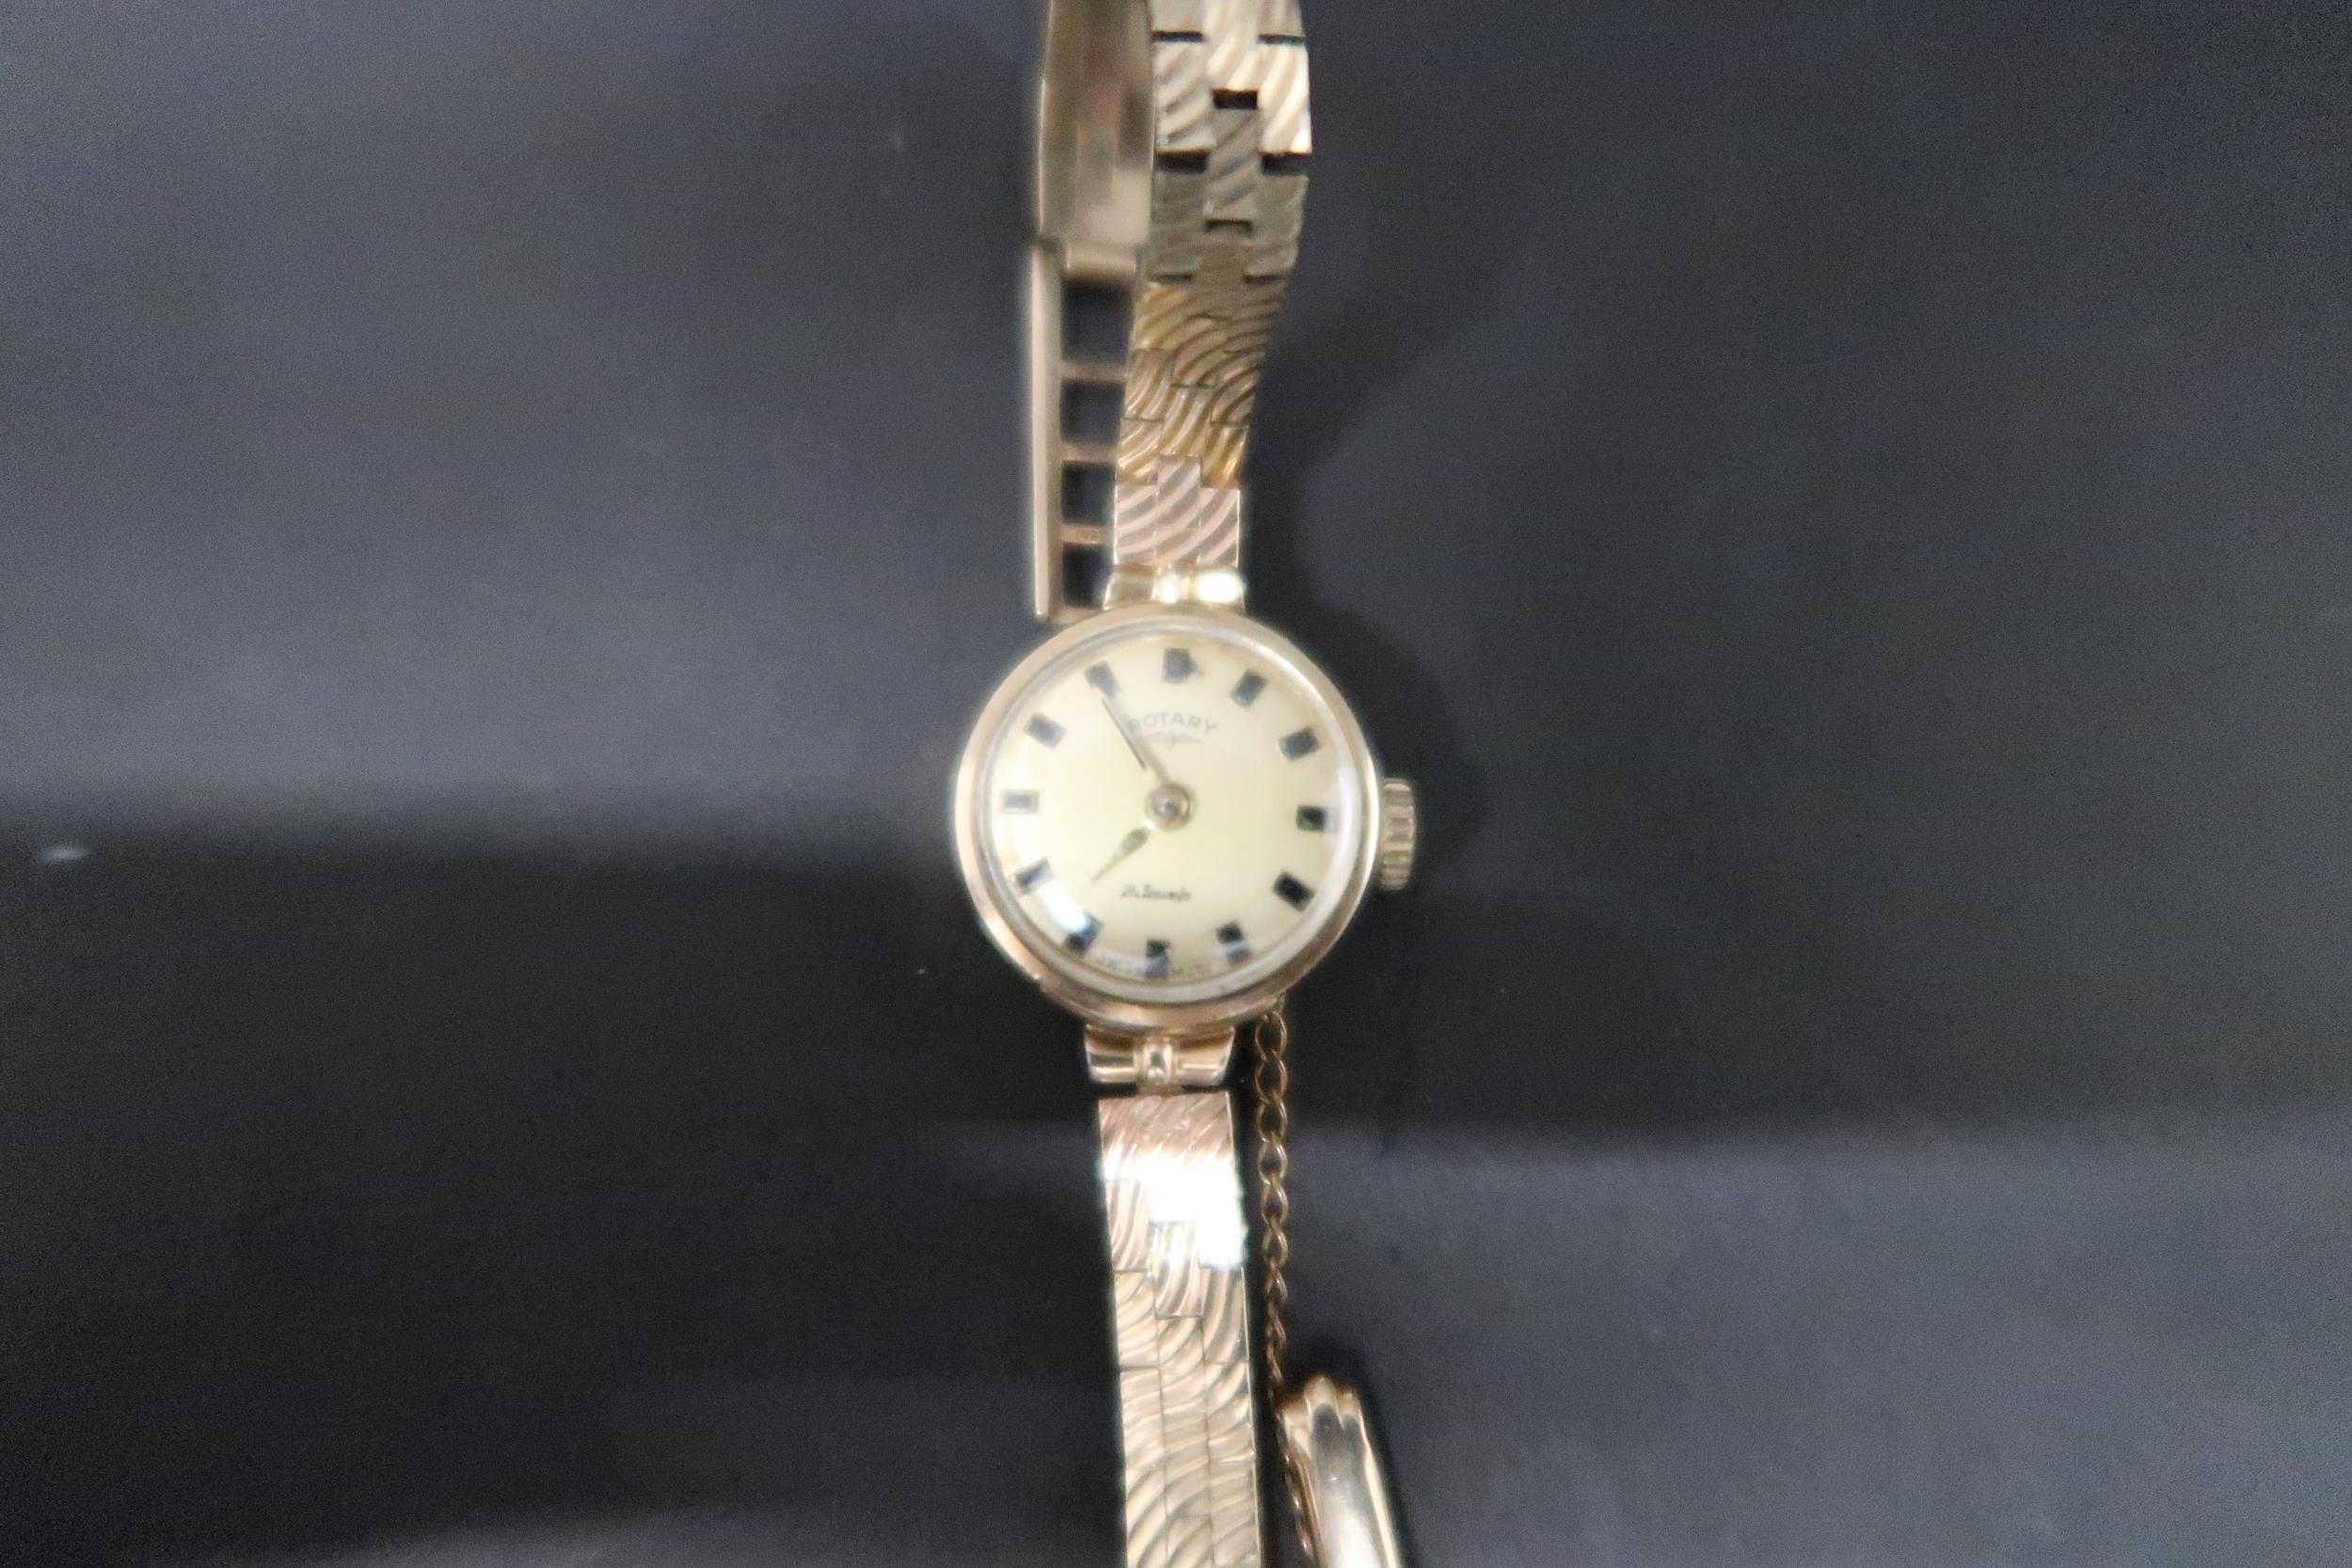 A ladies 9ct yellow gold cased Rotary watch with gold face and baton markers on 9ct gold bracelet - Image 2 of 2